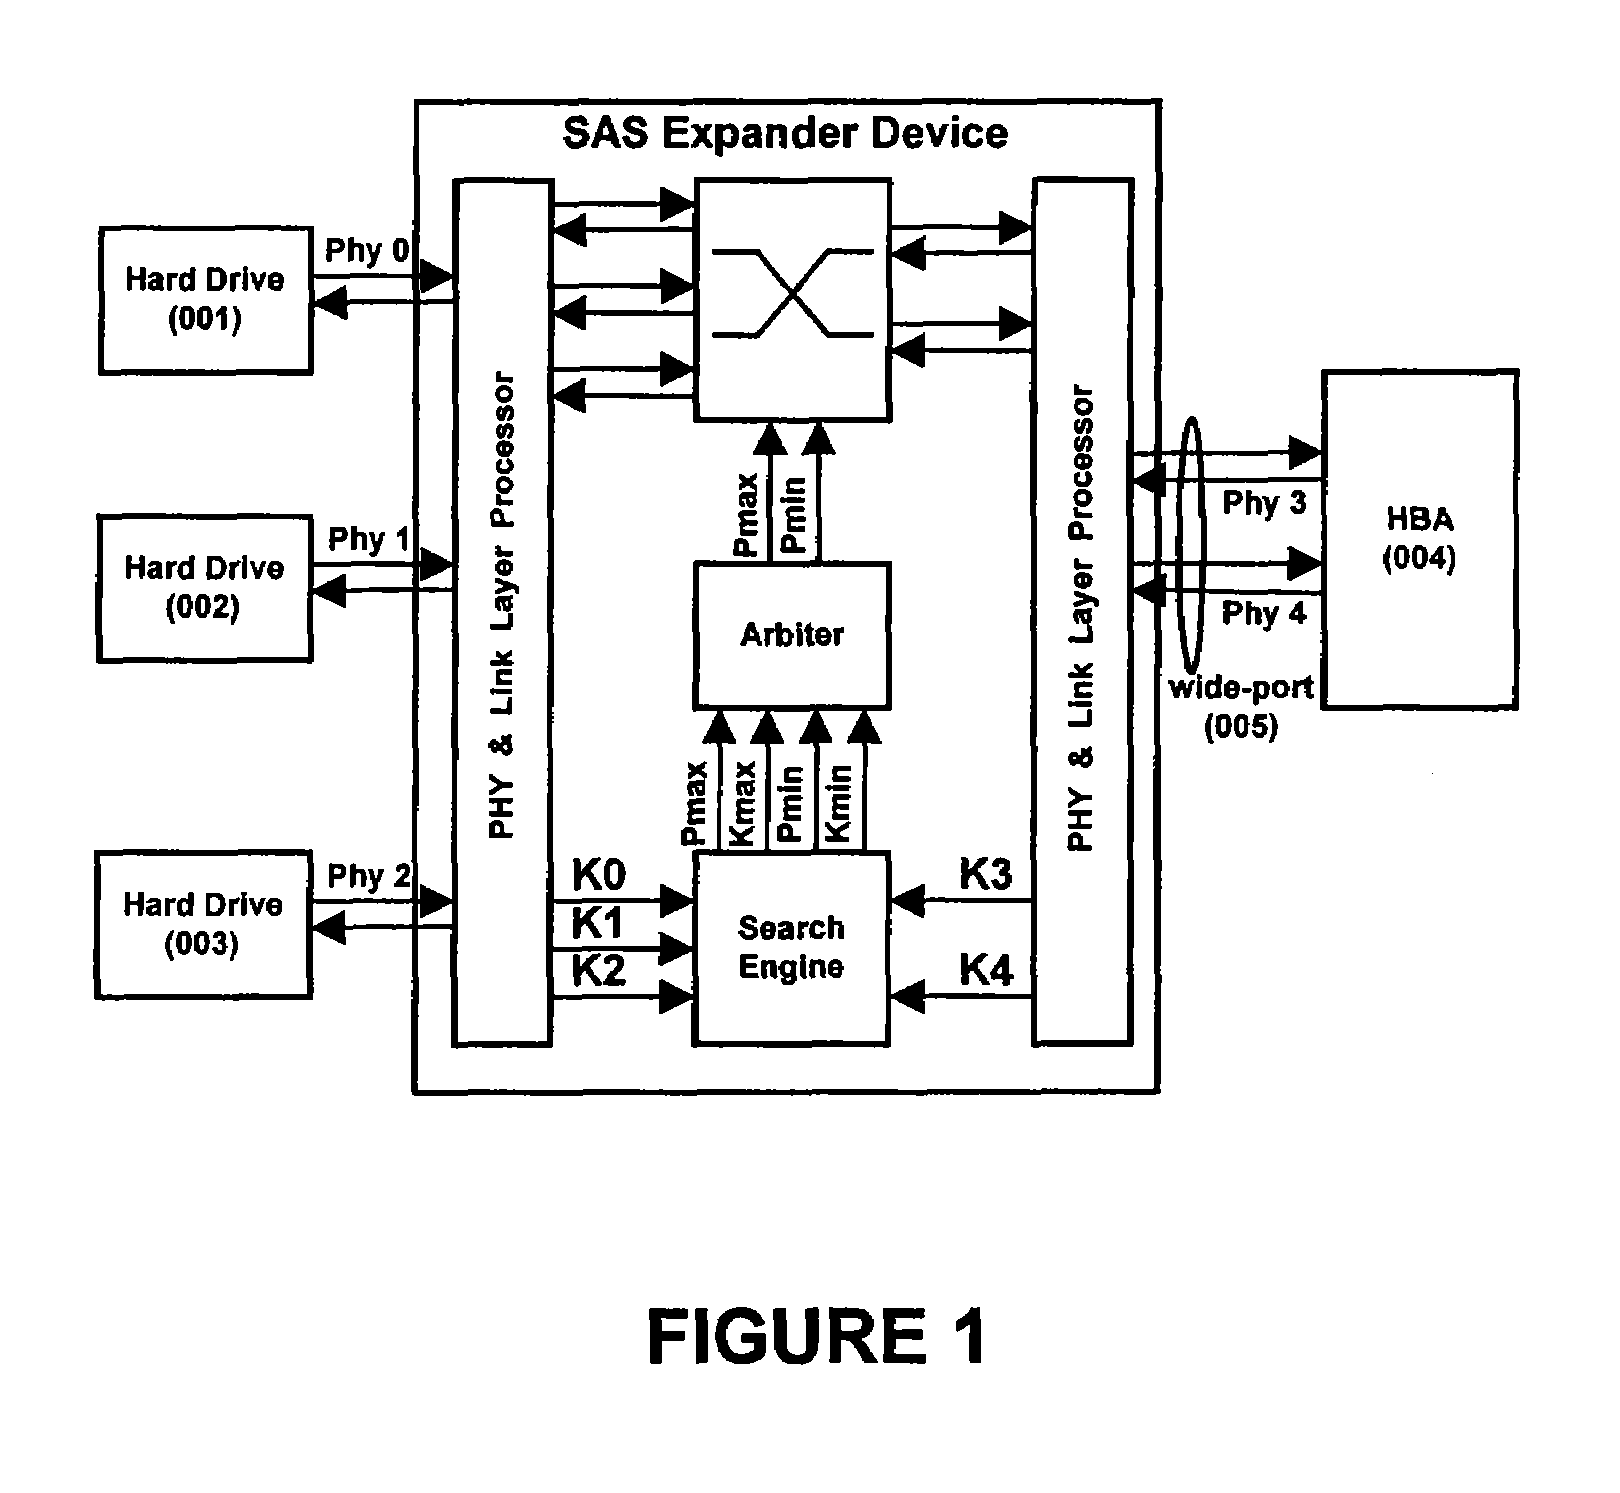 Connection management in serial attached SCSI (SAS) expanders